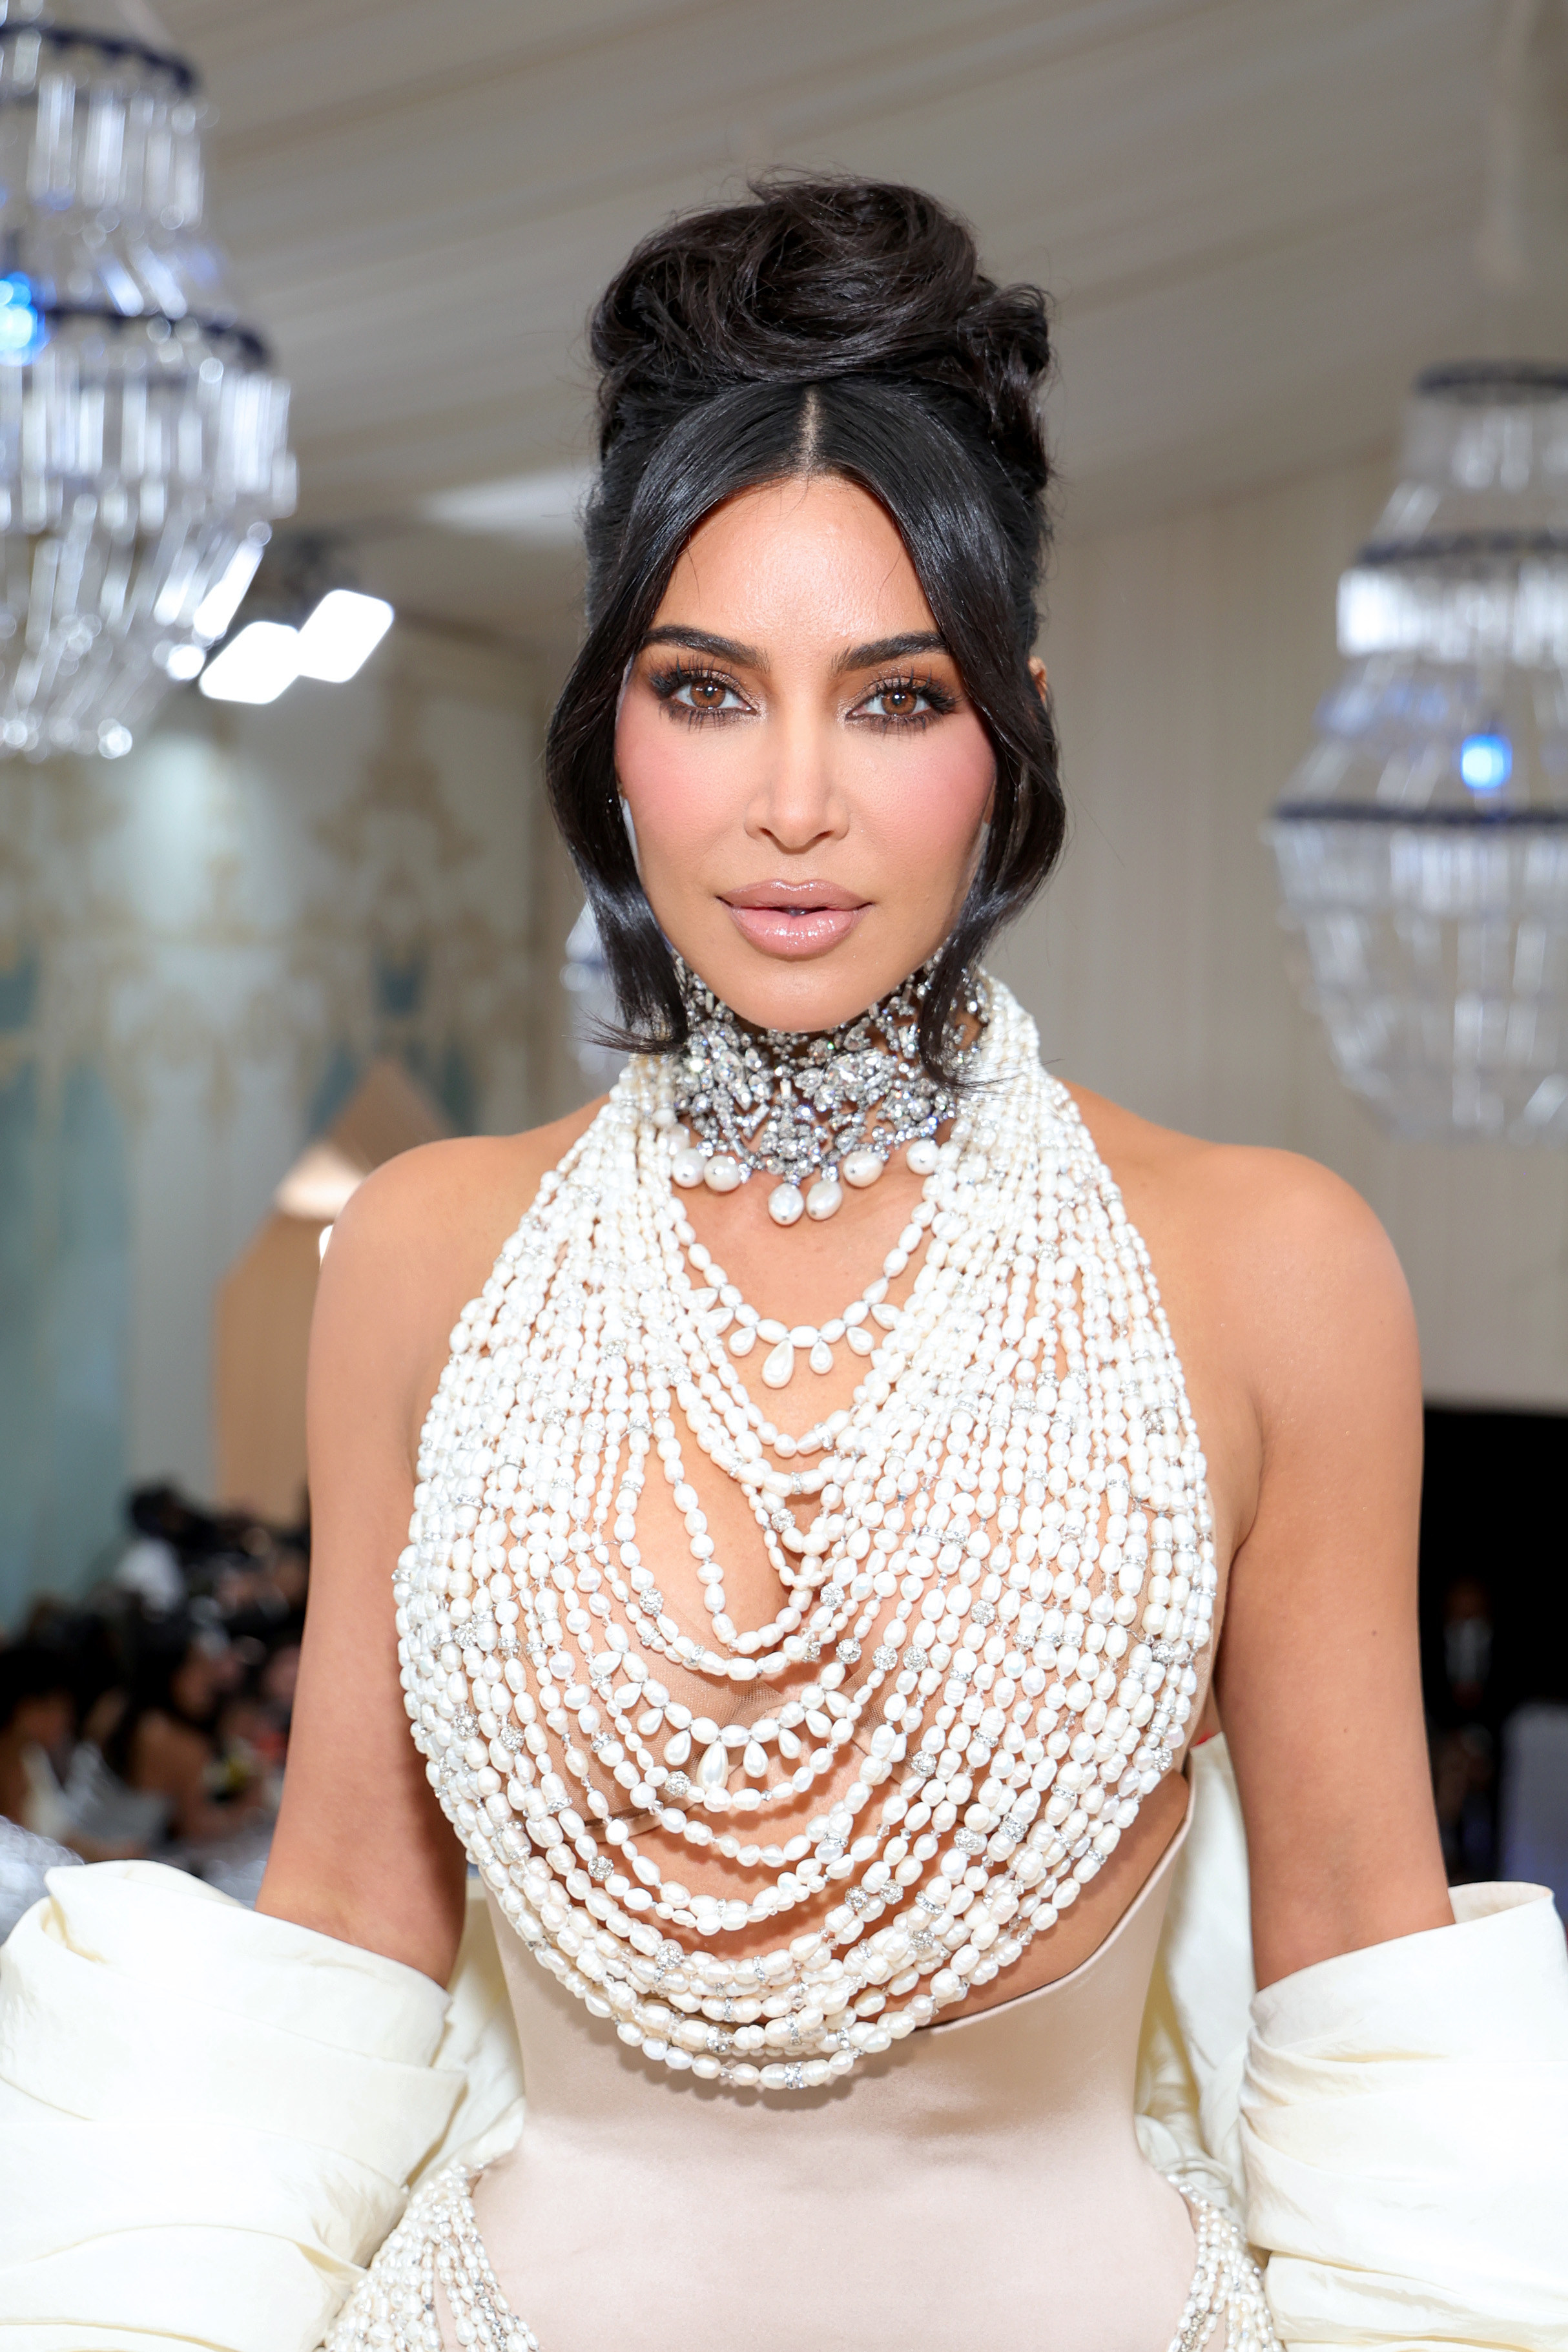 Kim in an ornate, multistrand pearl necklace that doubles at the top part of her dress